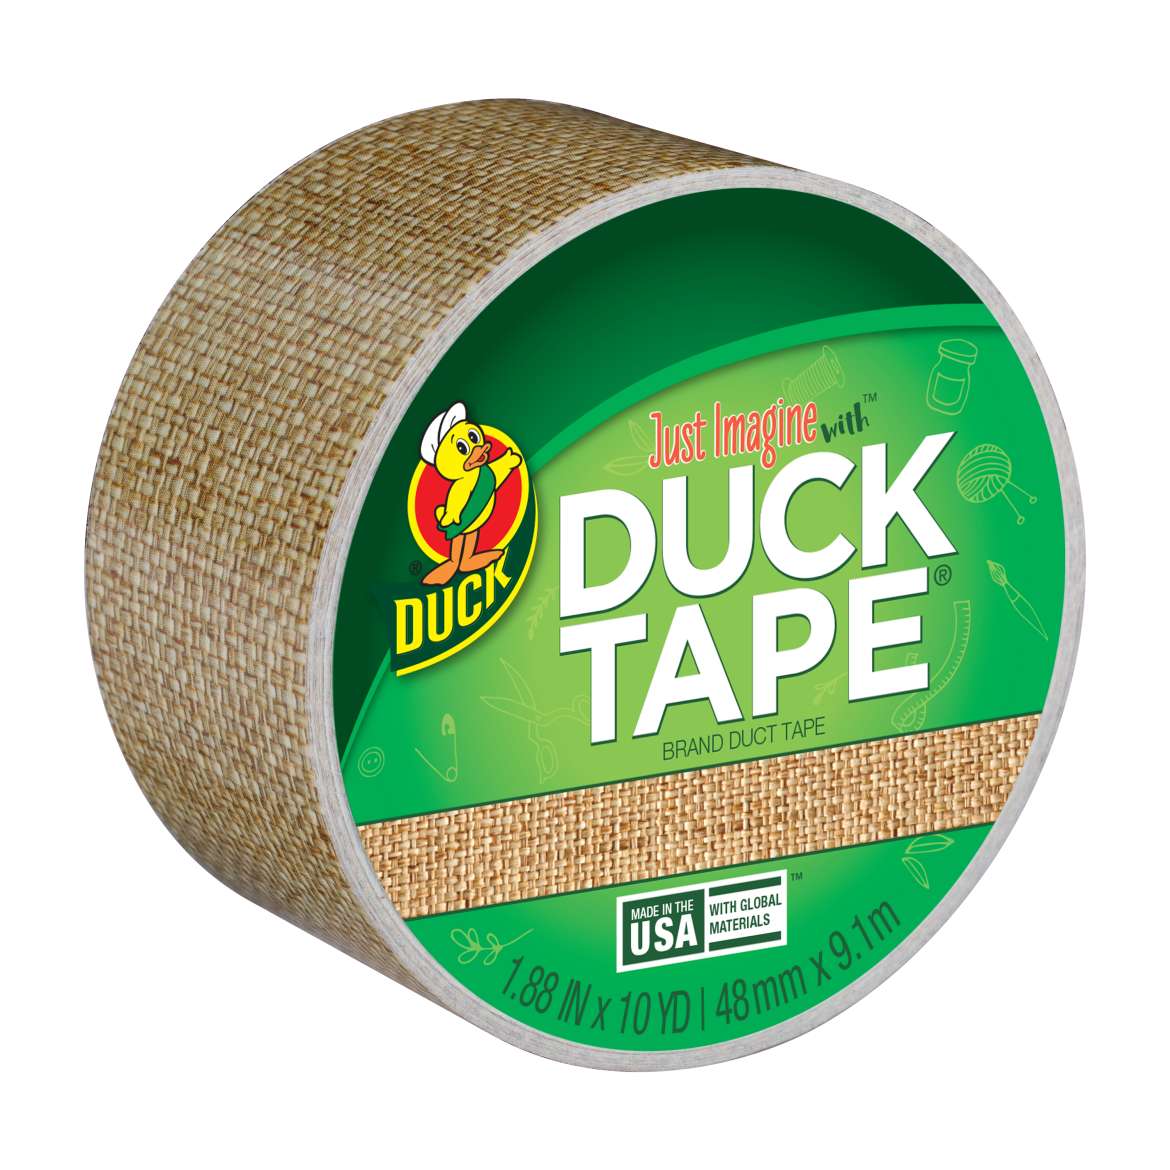 Printed Duck Tape® Brand Duct Tape - Burlap, 1.88 in. x 10 yd.